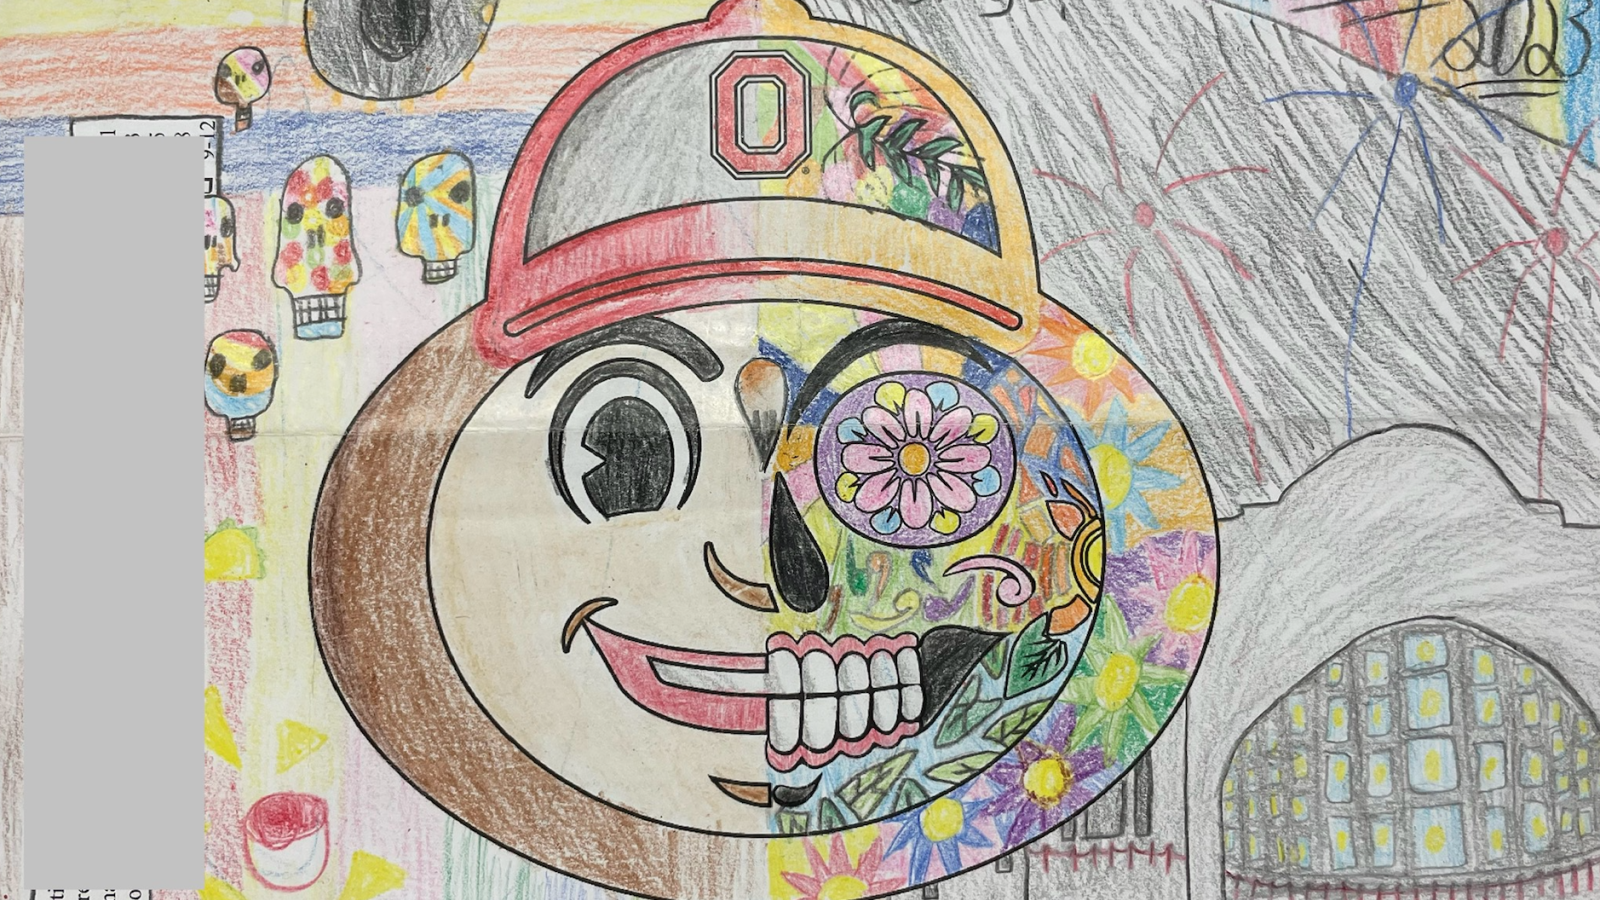 The Brutus Coloring Contest image of half brutus, half sugar skull, with the image hand-colored in with crayons and/or markers